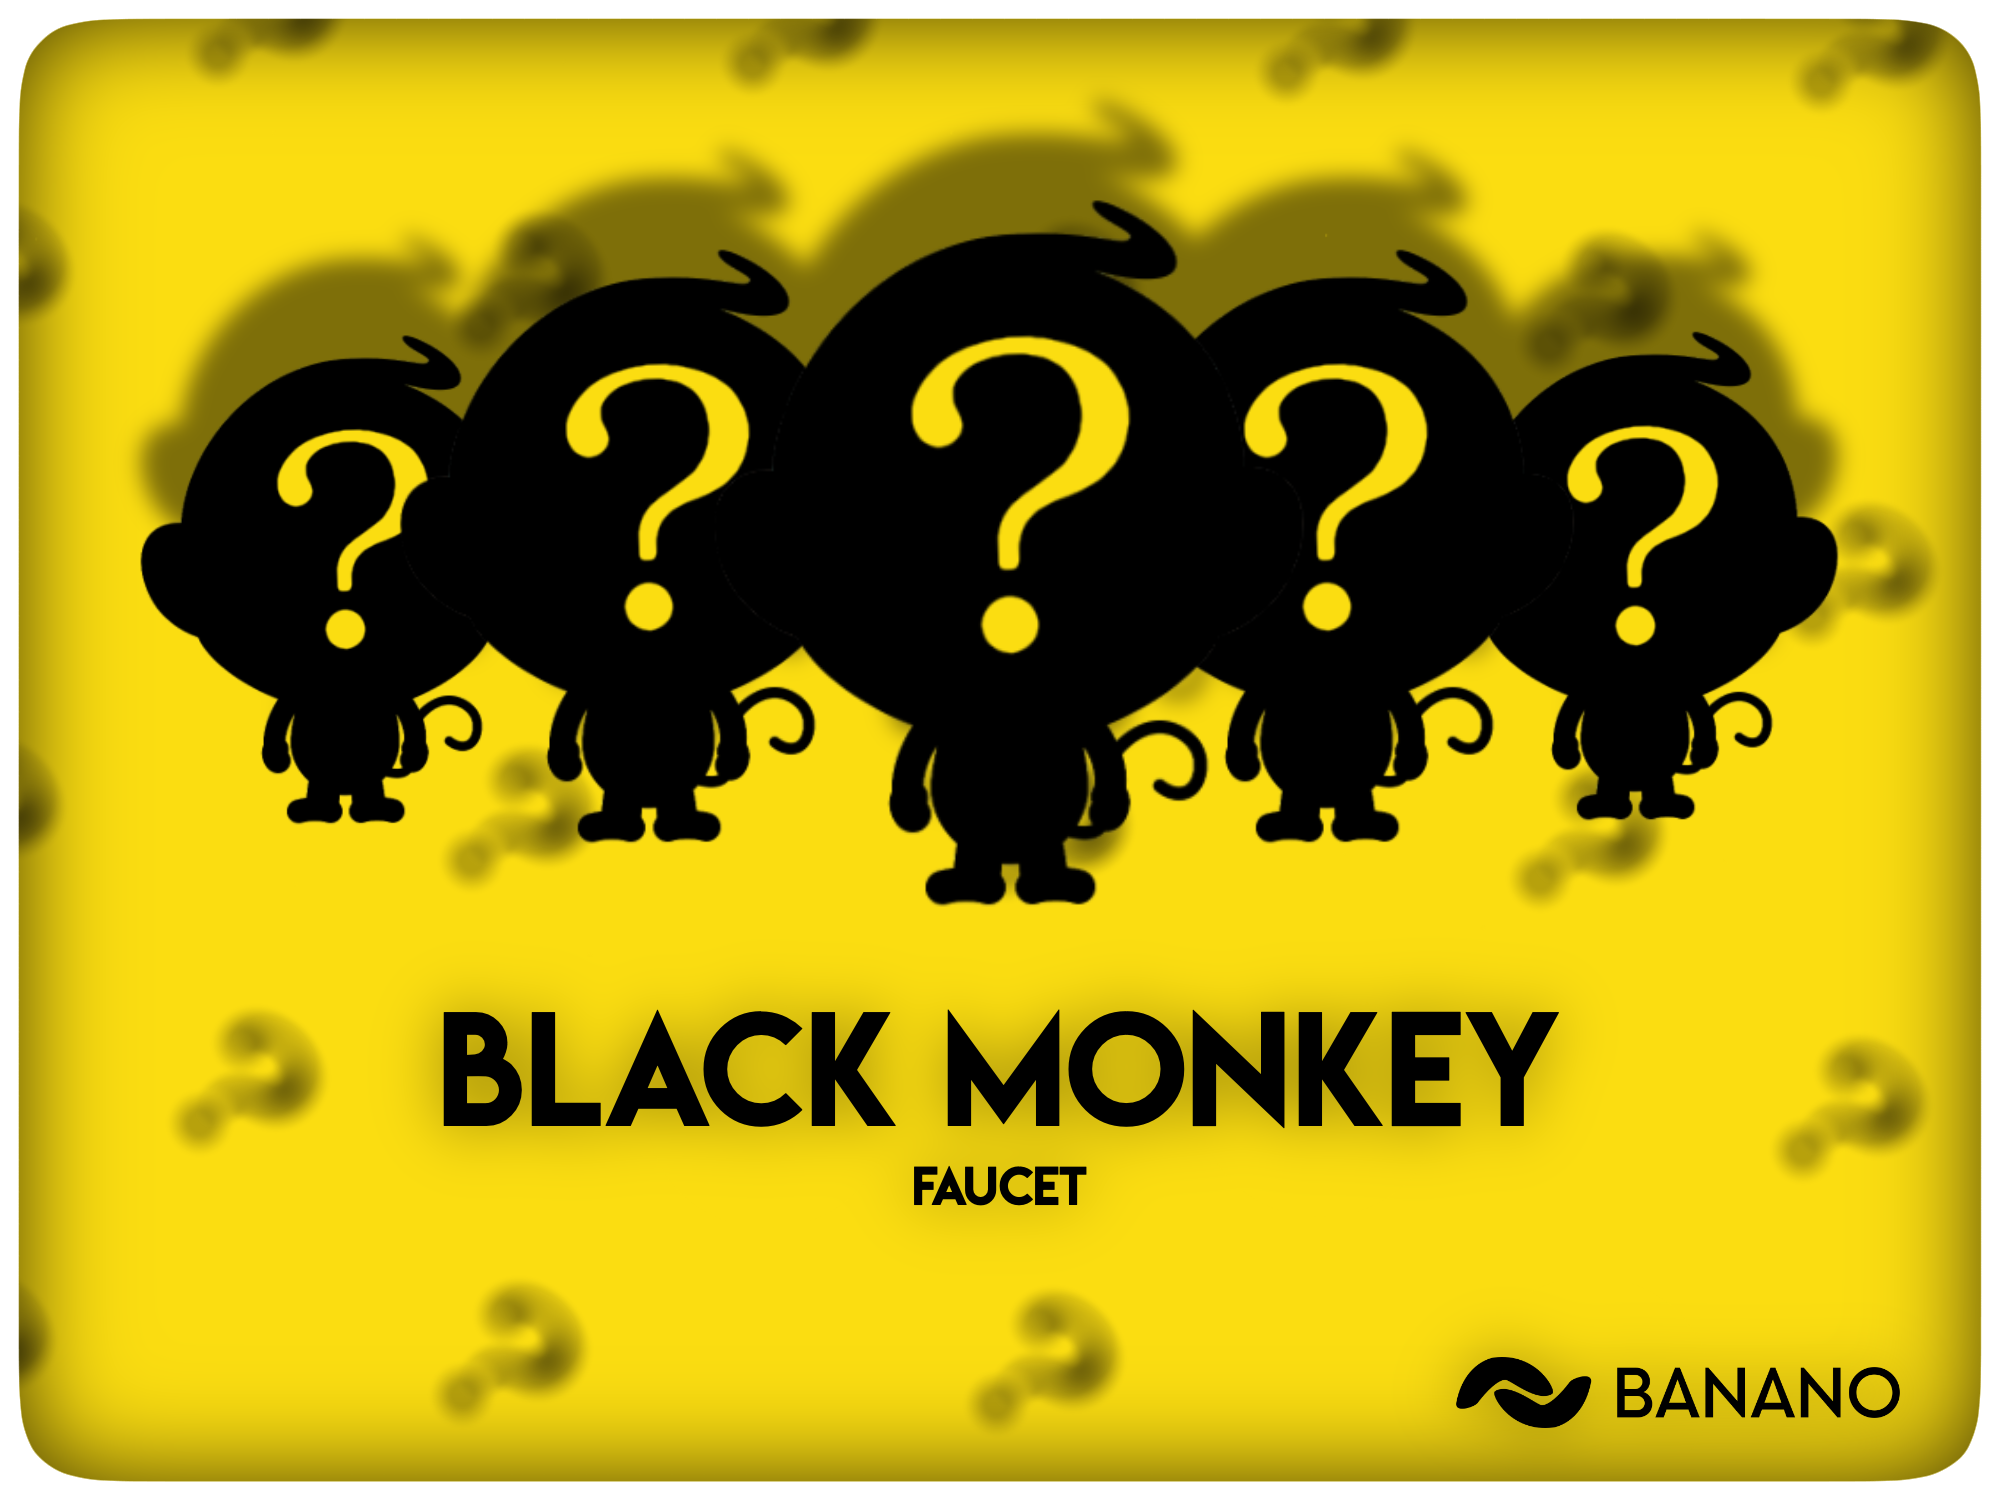 Update: Get Free $BANANO through Faucet Games: Play ‘Black Monkey’ Round 10 and More!